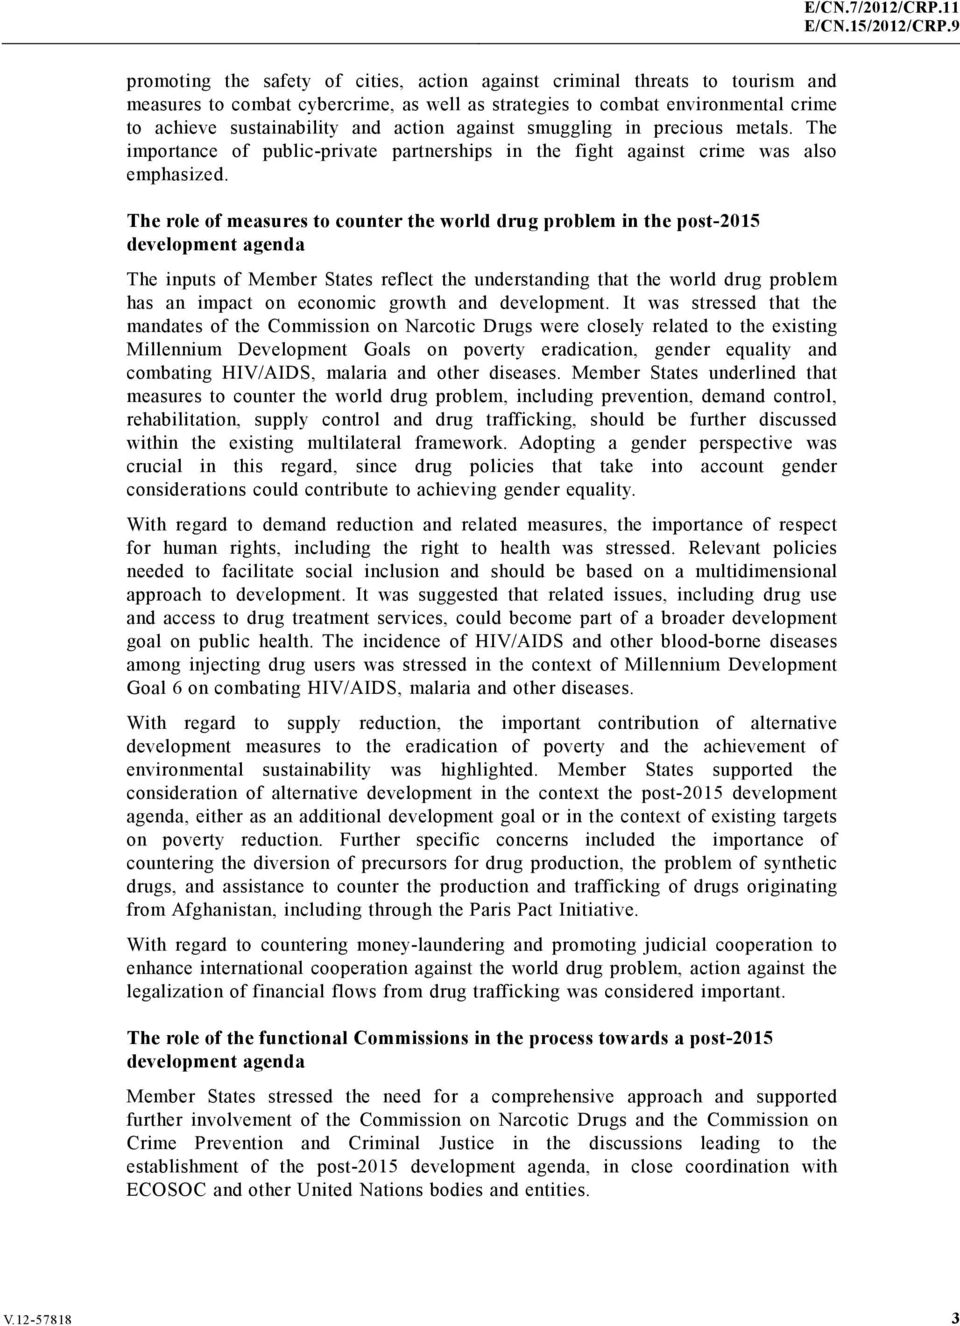 The role of measures to counter the world drug problem in the post-2015 development agenda The inputs of Member States reflect the understanding that the world drug problem has an impact on economic